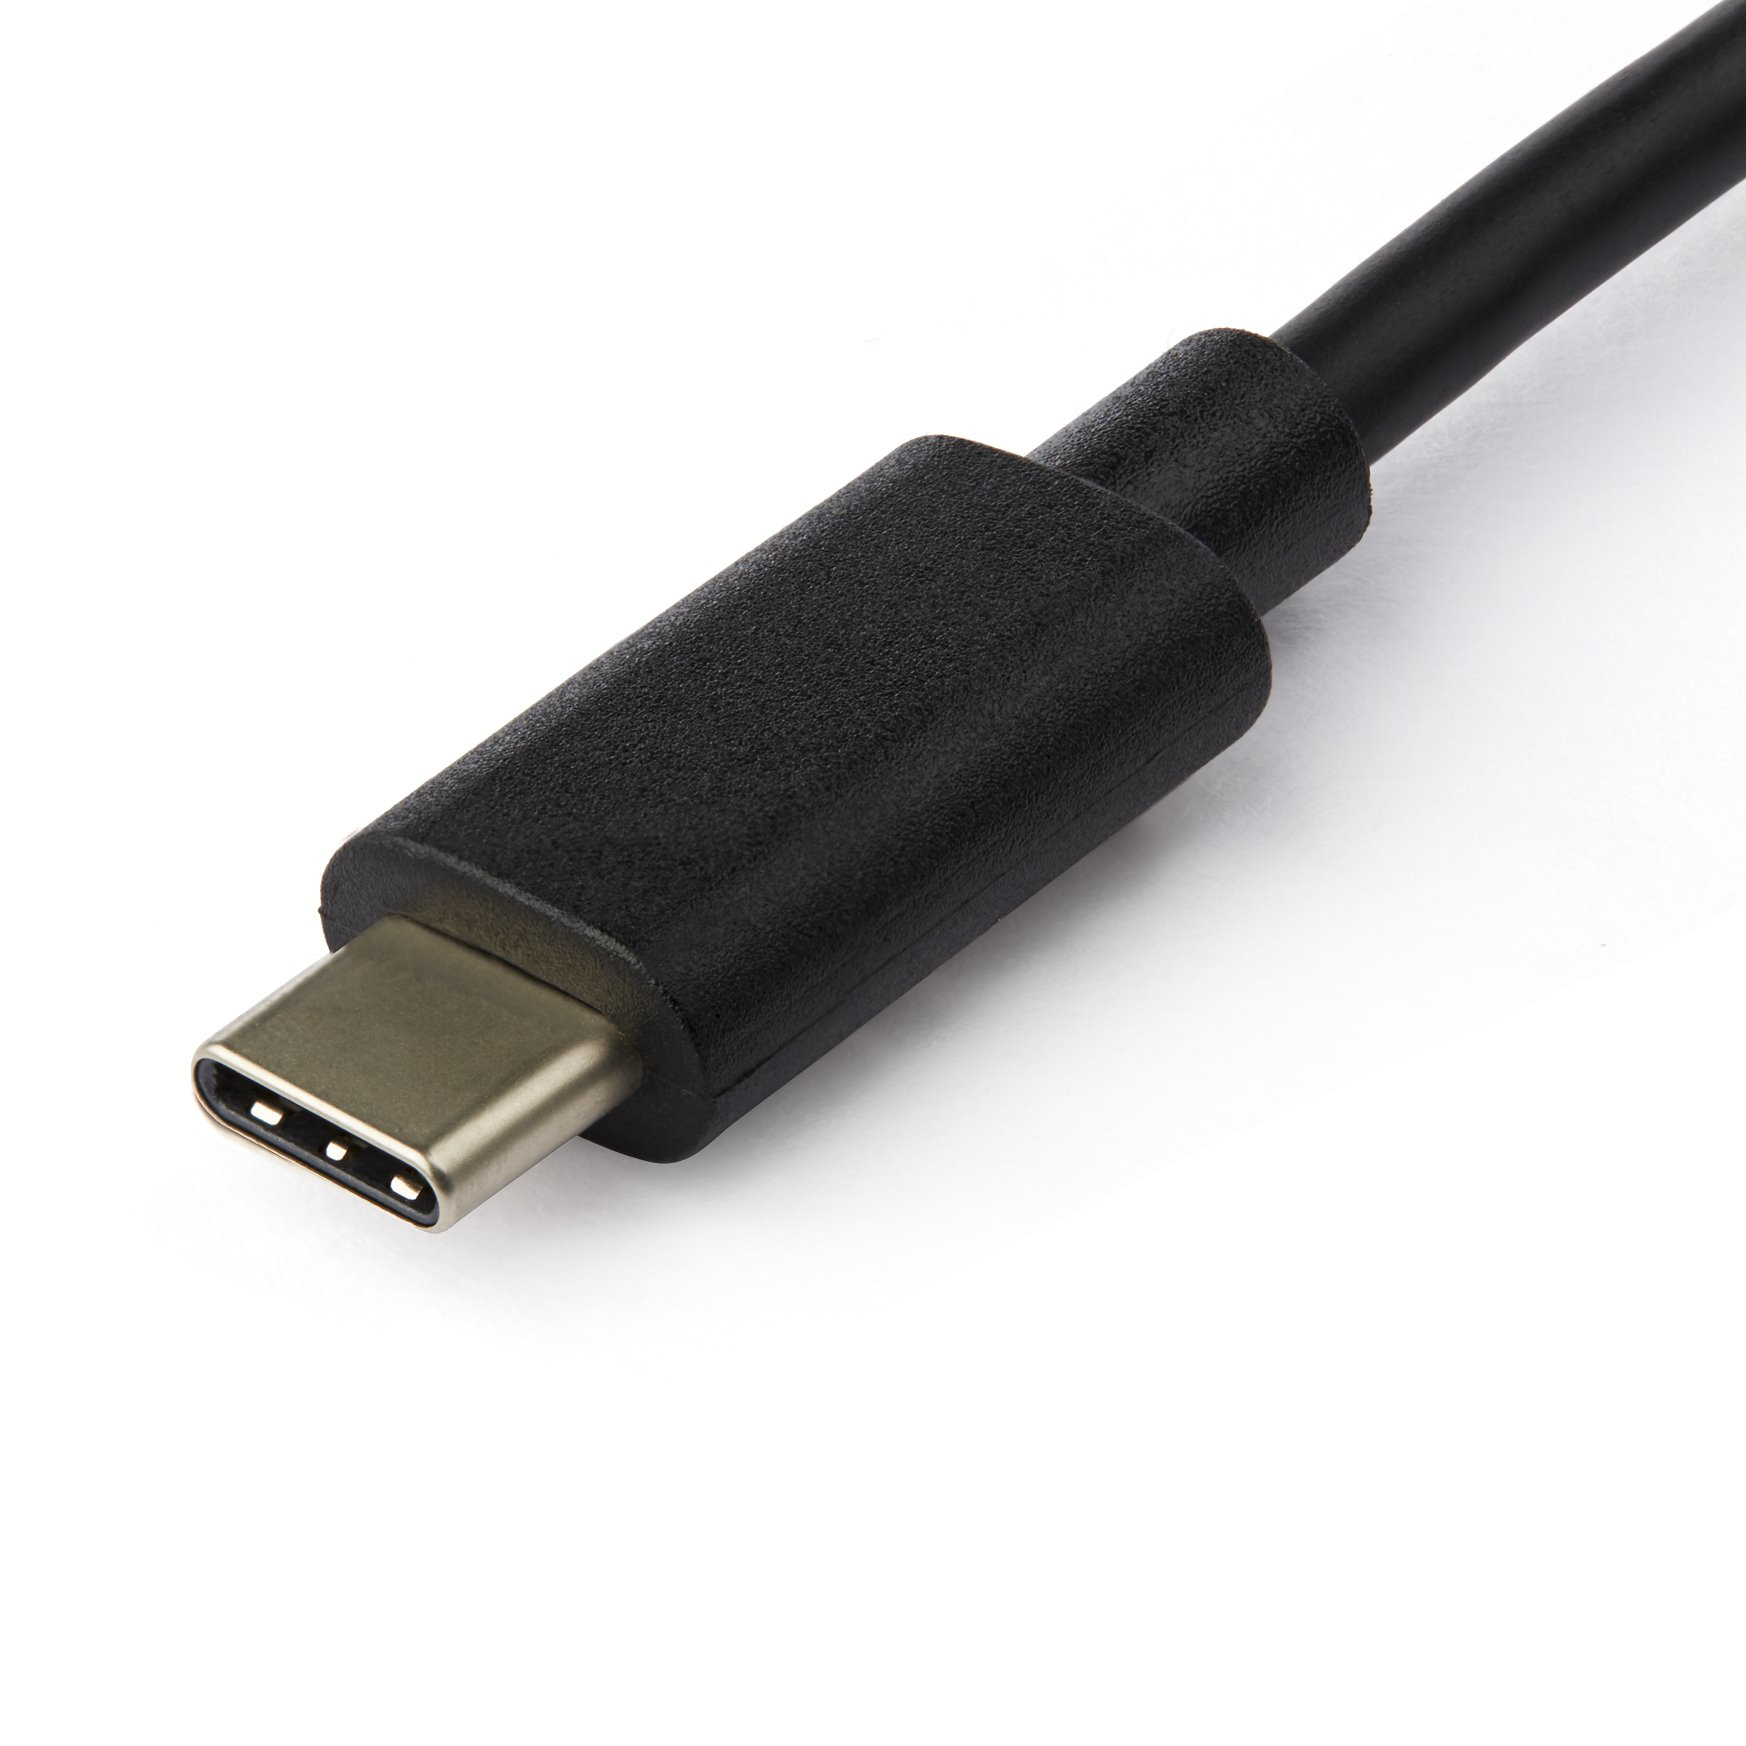 Shop  StarTech.com USB C to SATA Adapter Cable - for 2.5 / 3.5